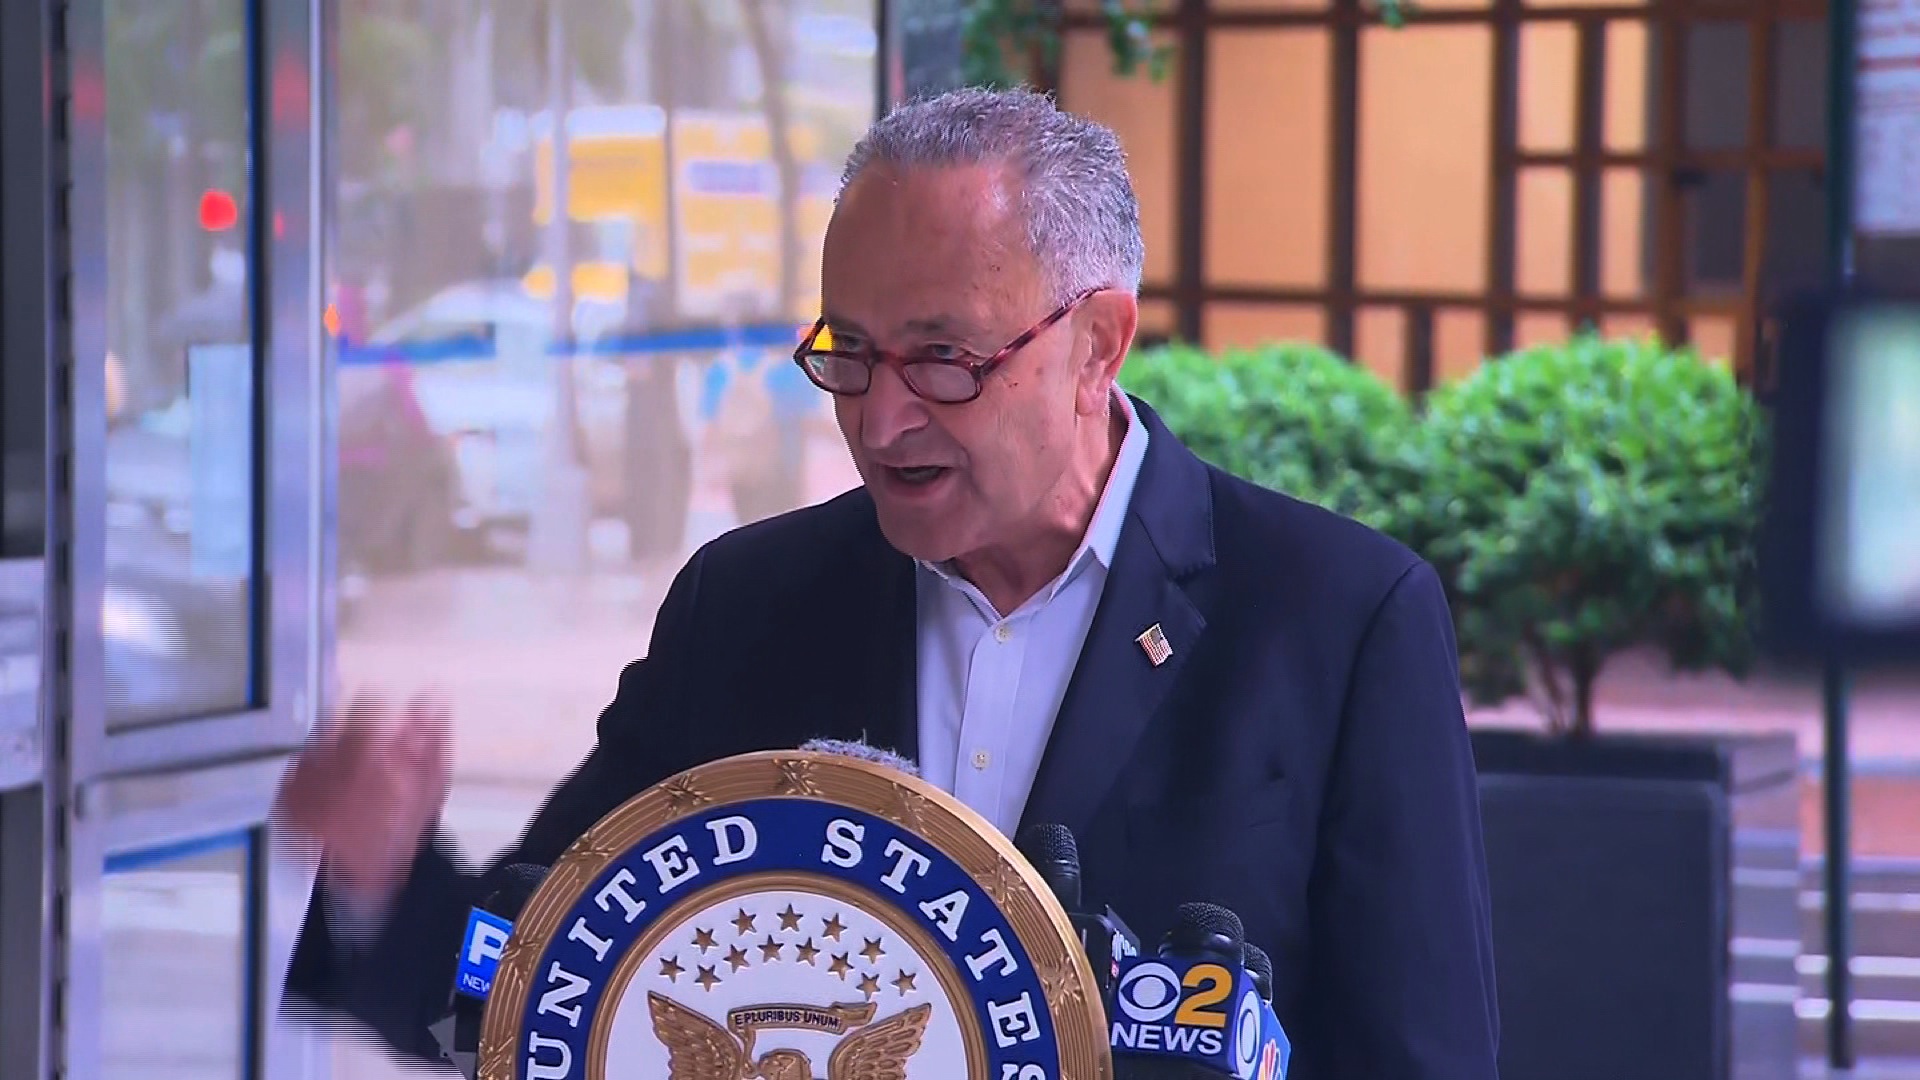 Sen. Chuck Schumer speaks at a press conference on August 16.